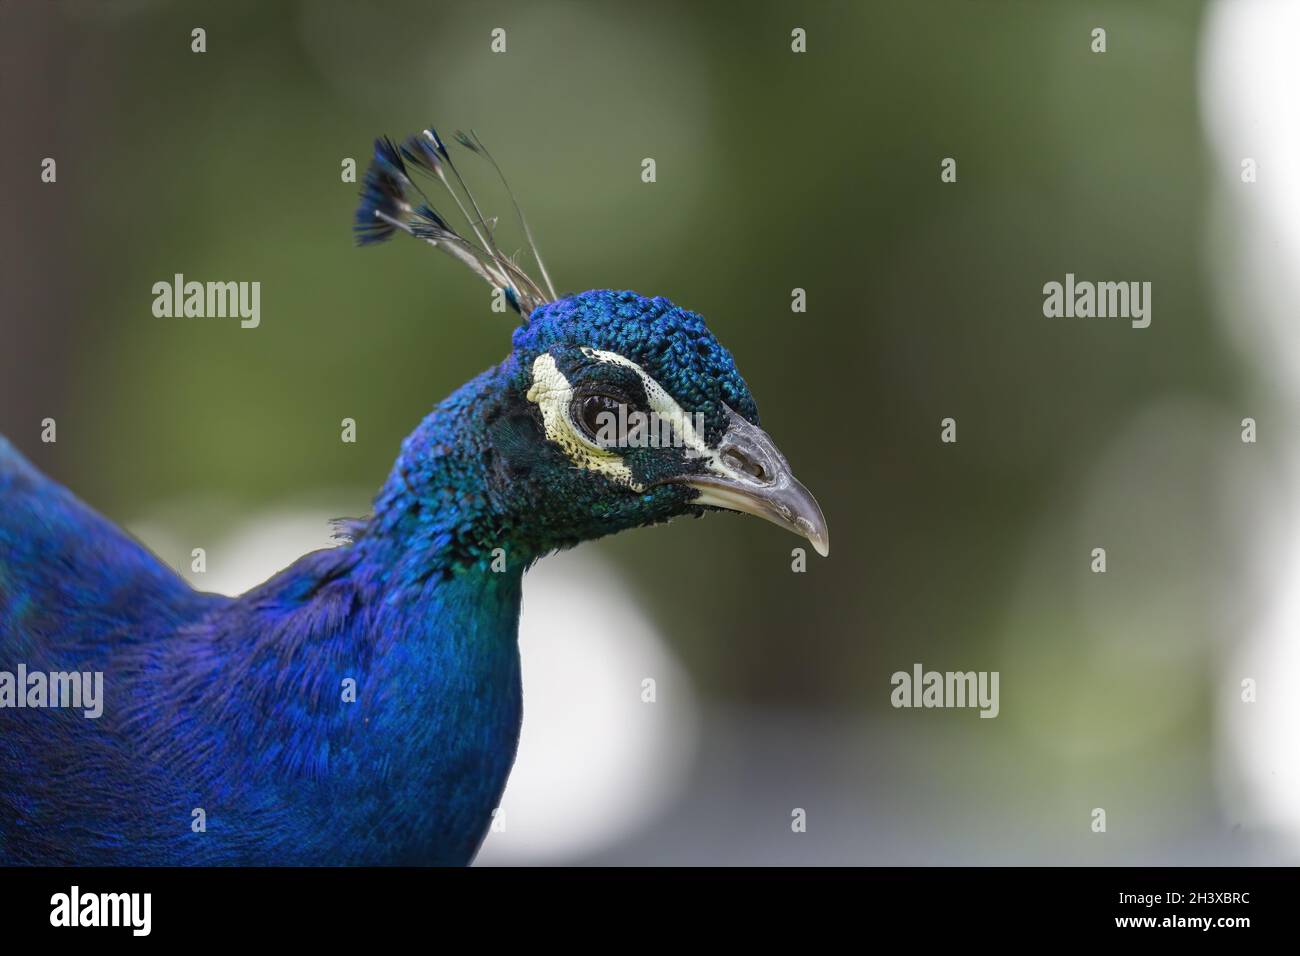 Male of Indian peacock (Pavo cristatus) on the park Stock Photo